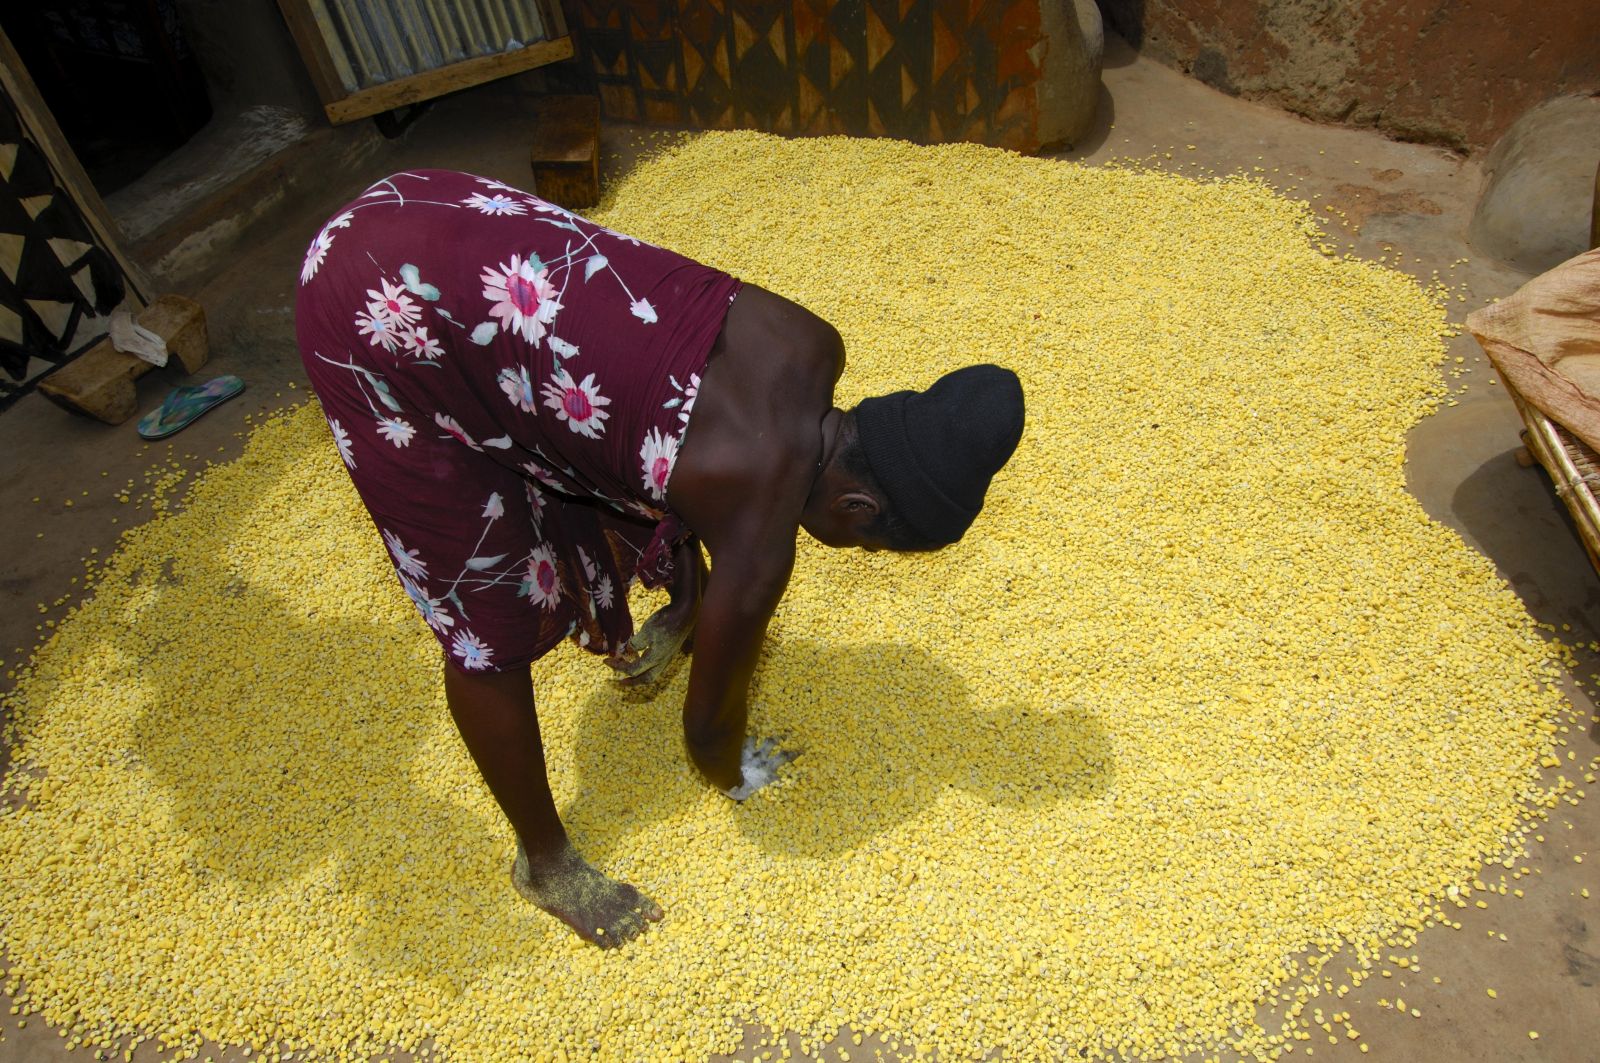 A woman spreads the seeds of the African locust bean tree out on the floor to dry. The African locust bean is an important food-producing tree in Burkina Faso.